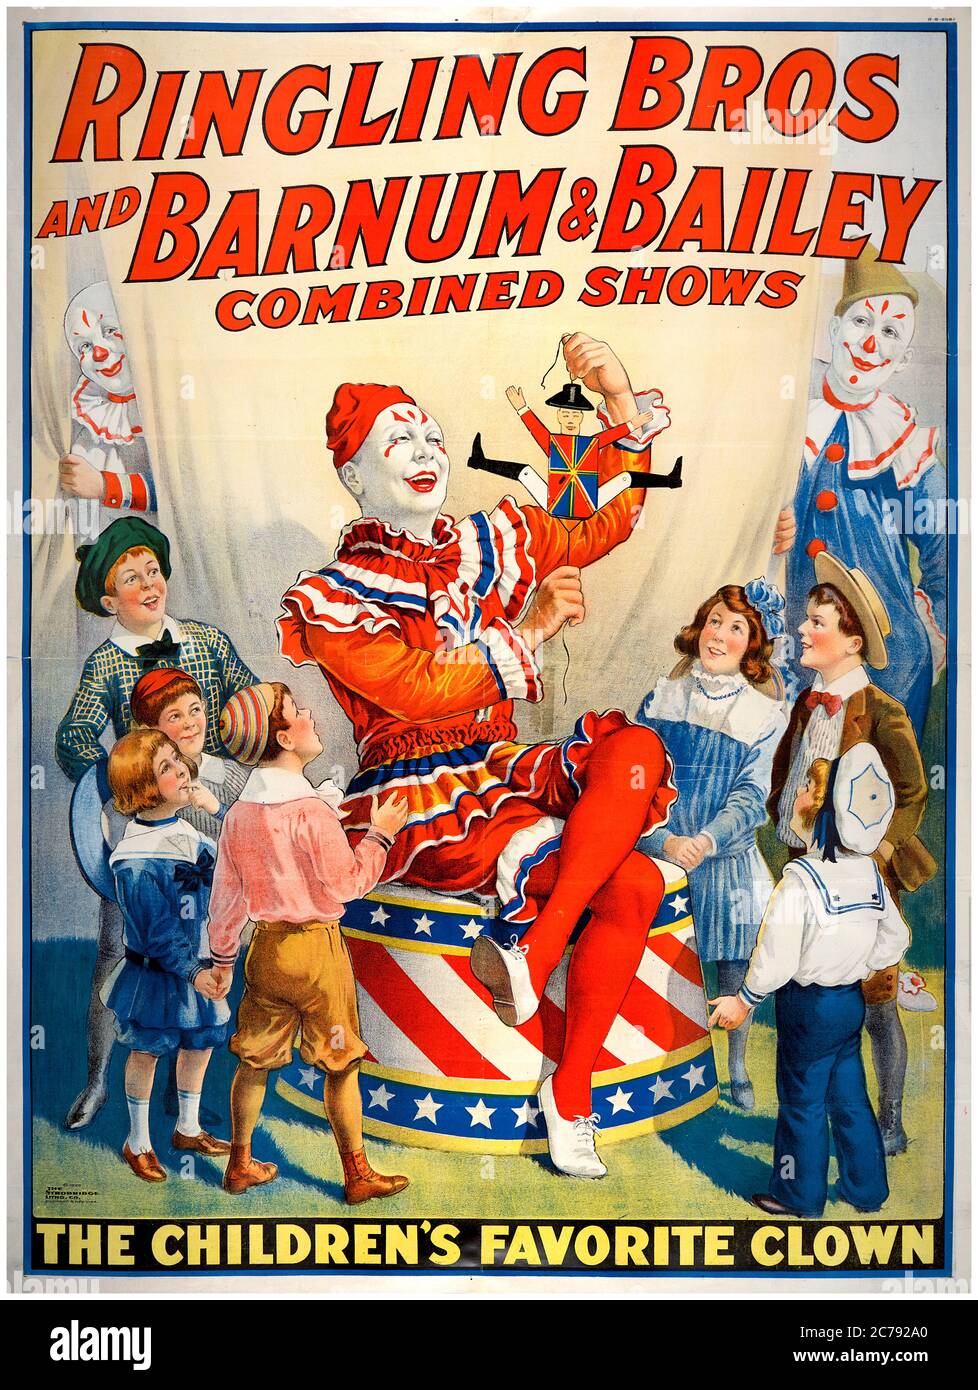 Ringling Brothers and Barnum & Bailey combined shows circus poster with a clown, 1920 Stock Photo